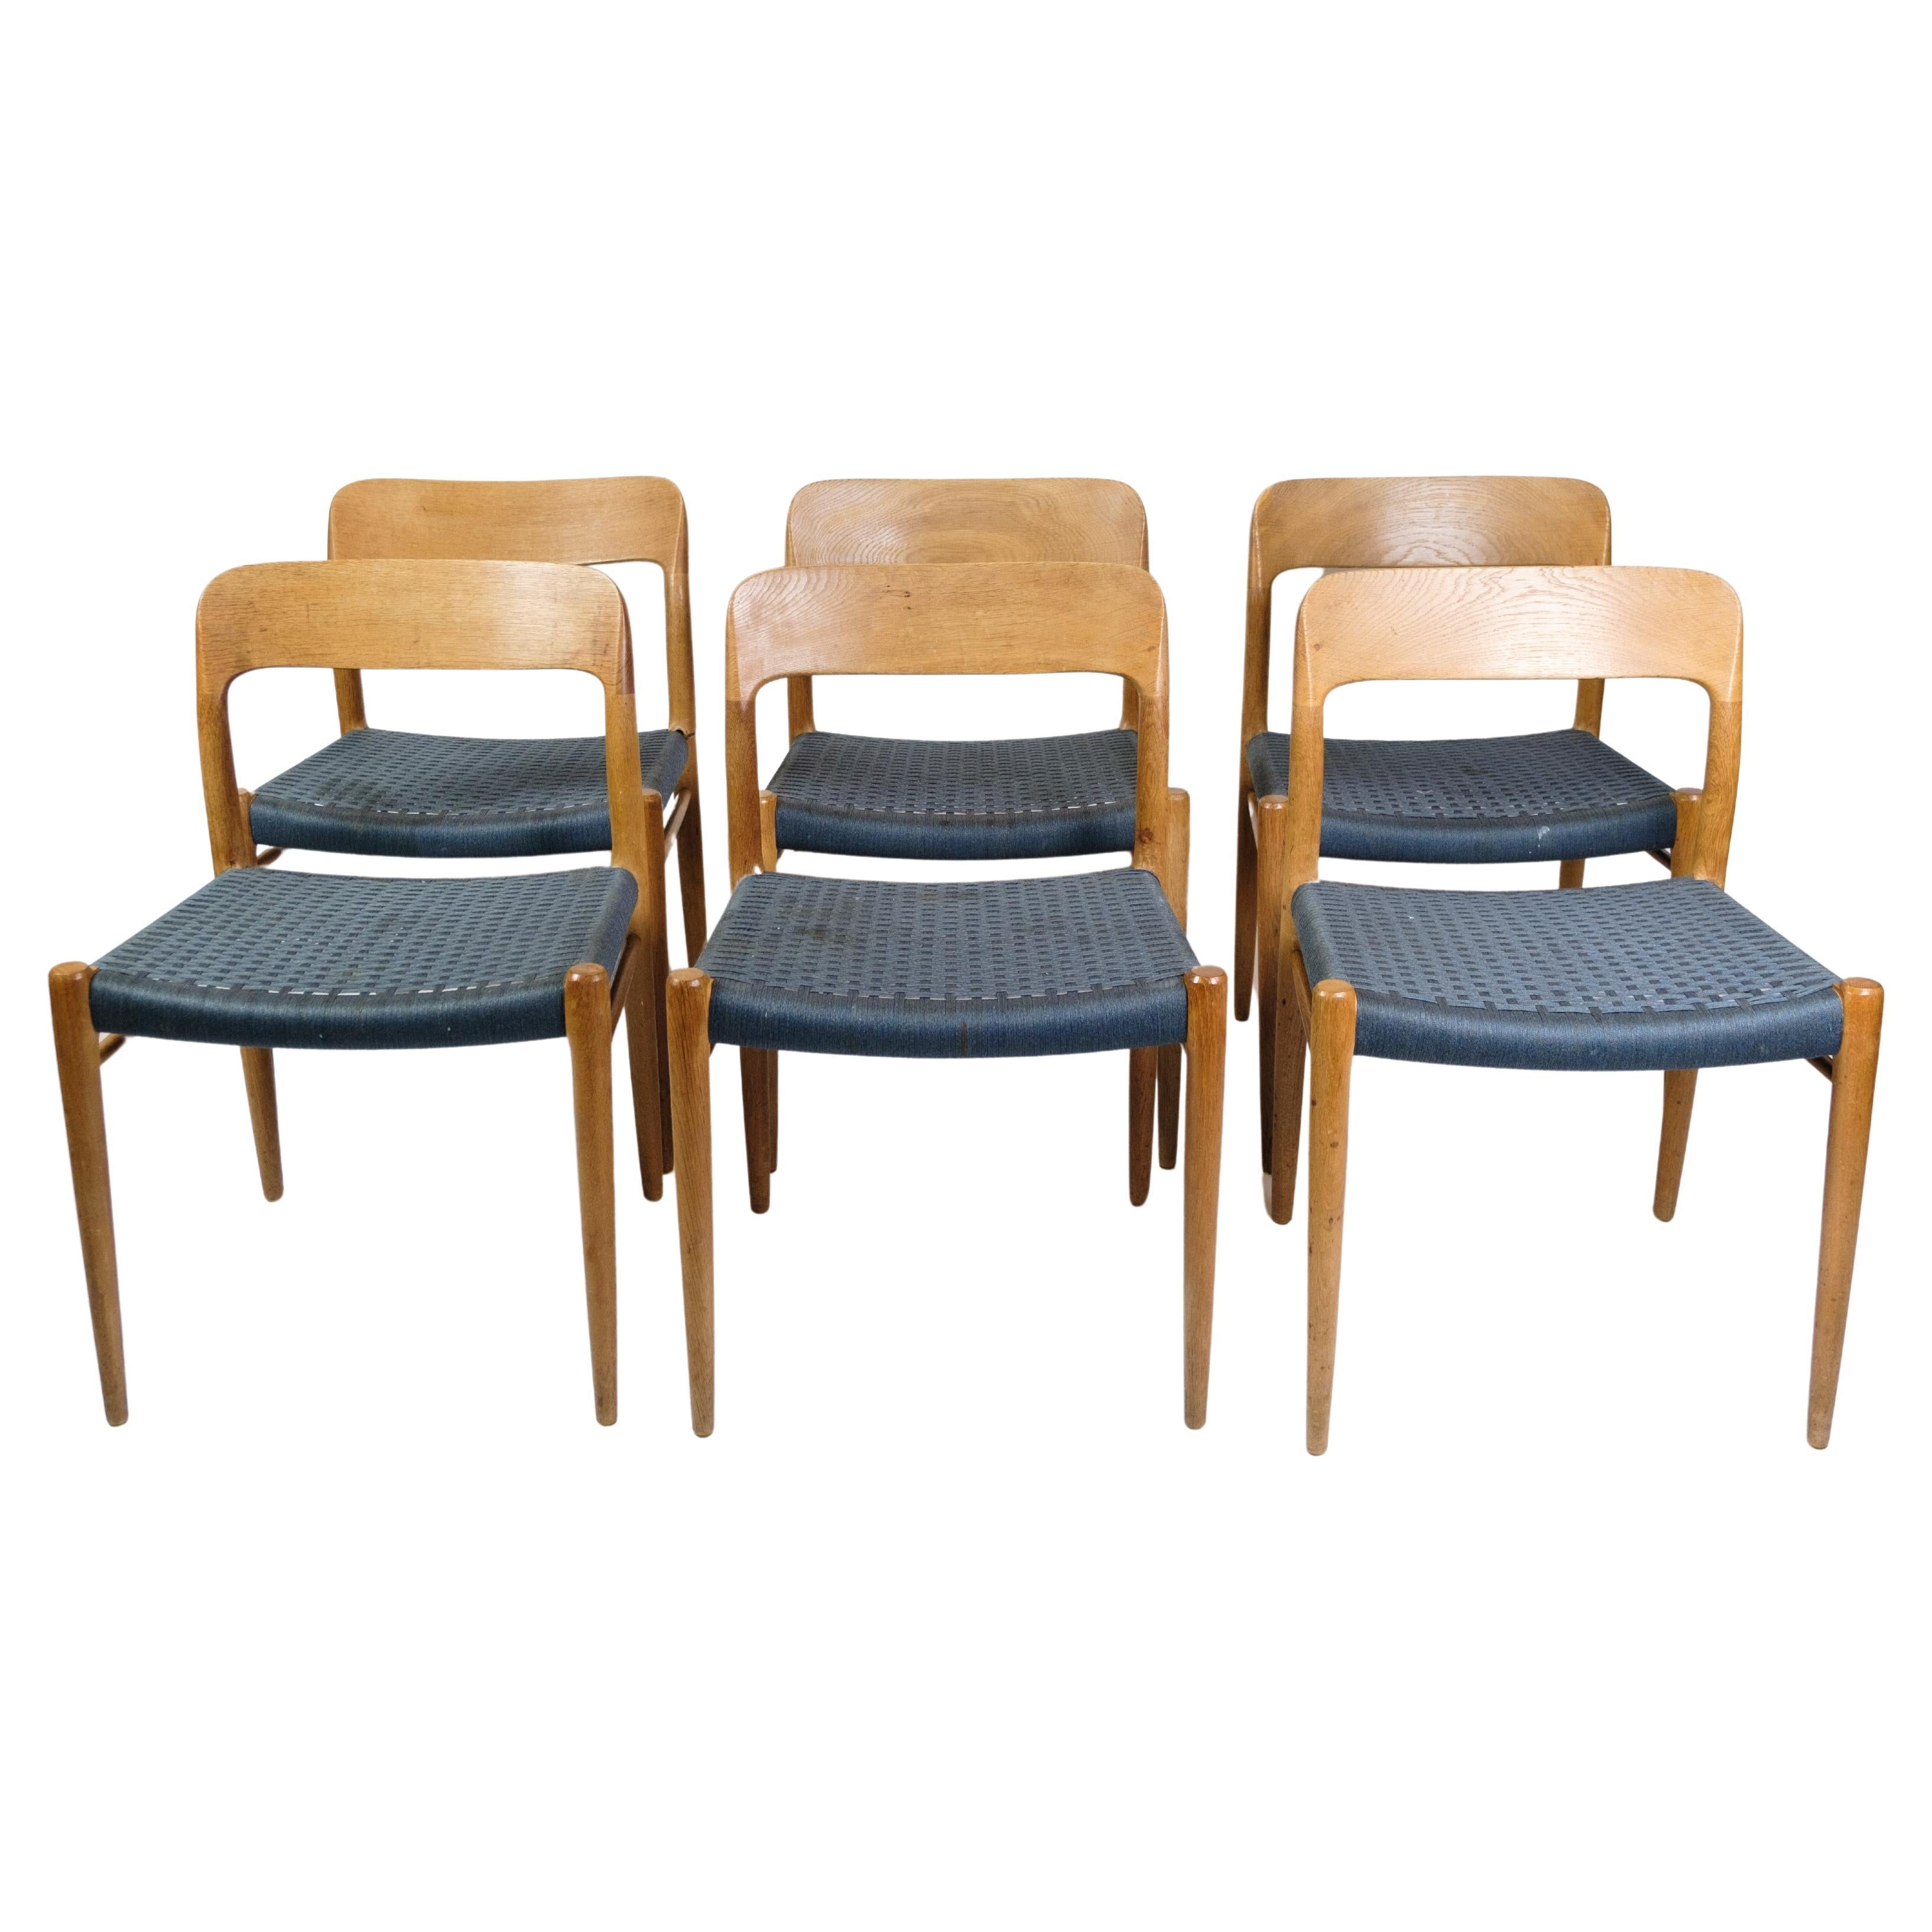 Dining Room Chairs Model 75 Made In Teak By Niels O. Møller From 1960s For Sale